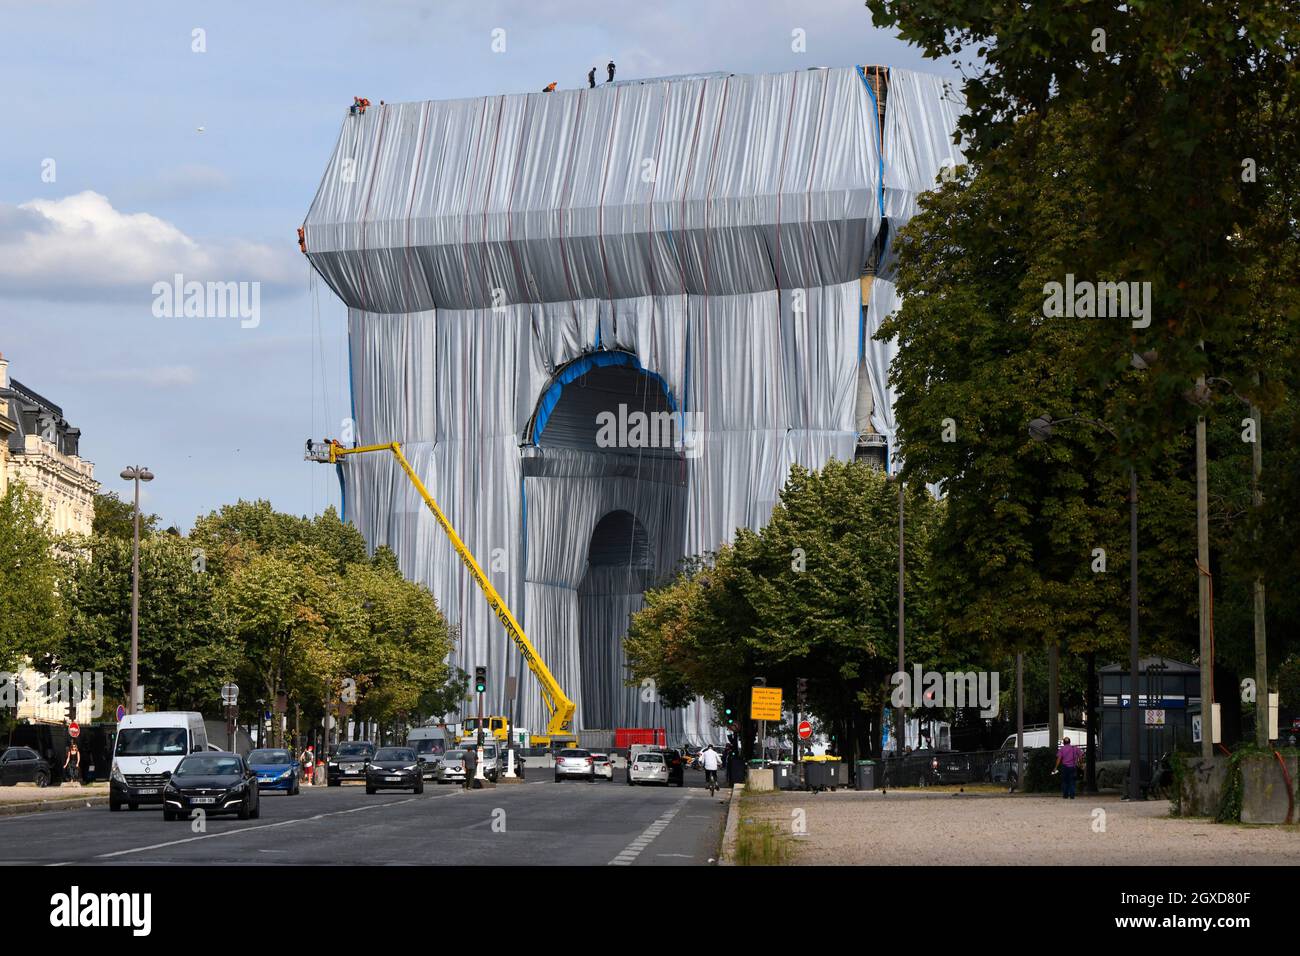 The Triumphal Arch in Paris swathed in silvery blue fabric and red rope as a posthumous project planned by the artist Christo, Paris, France. Stock Photo